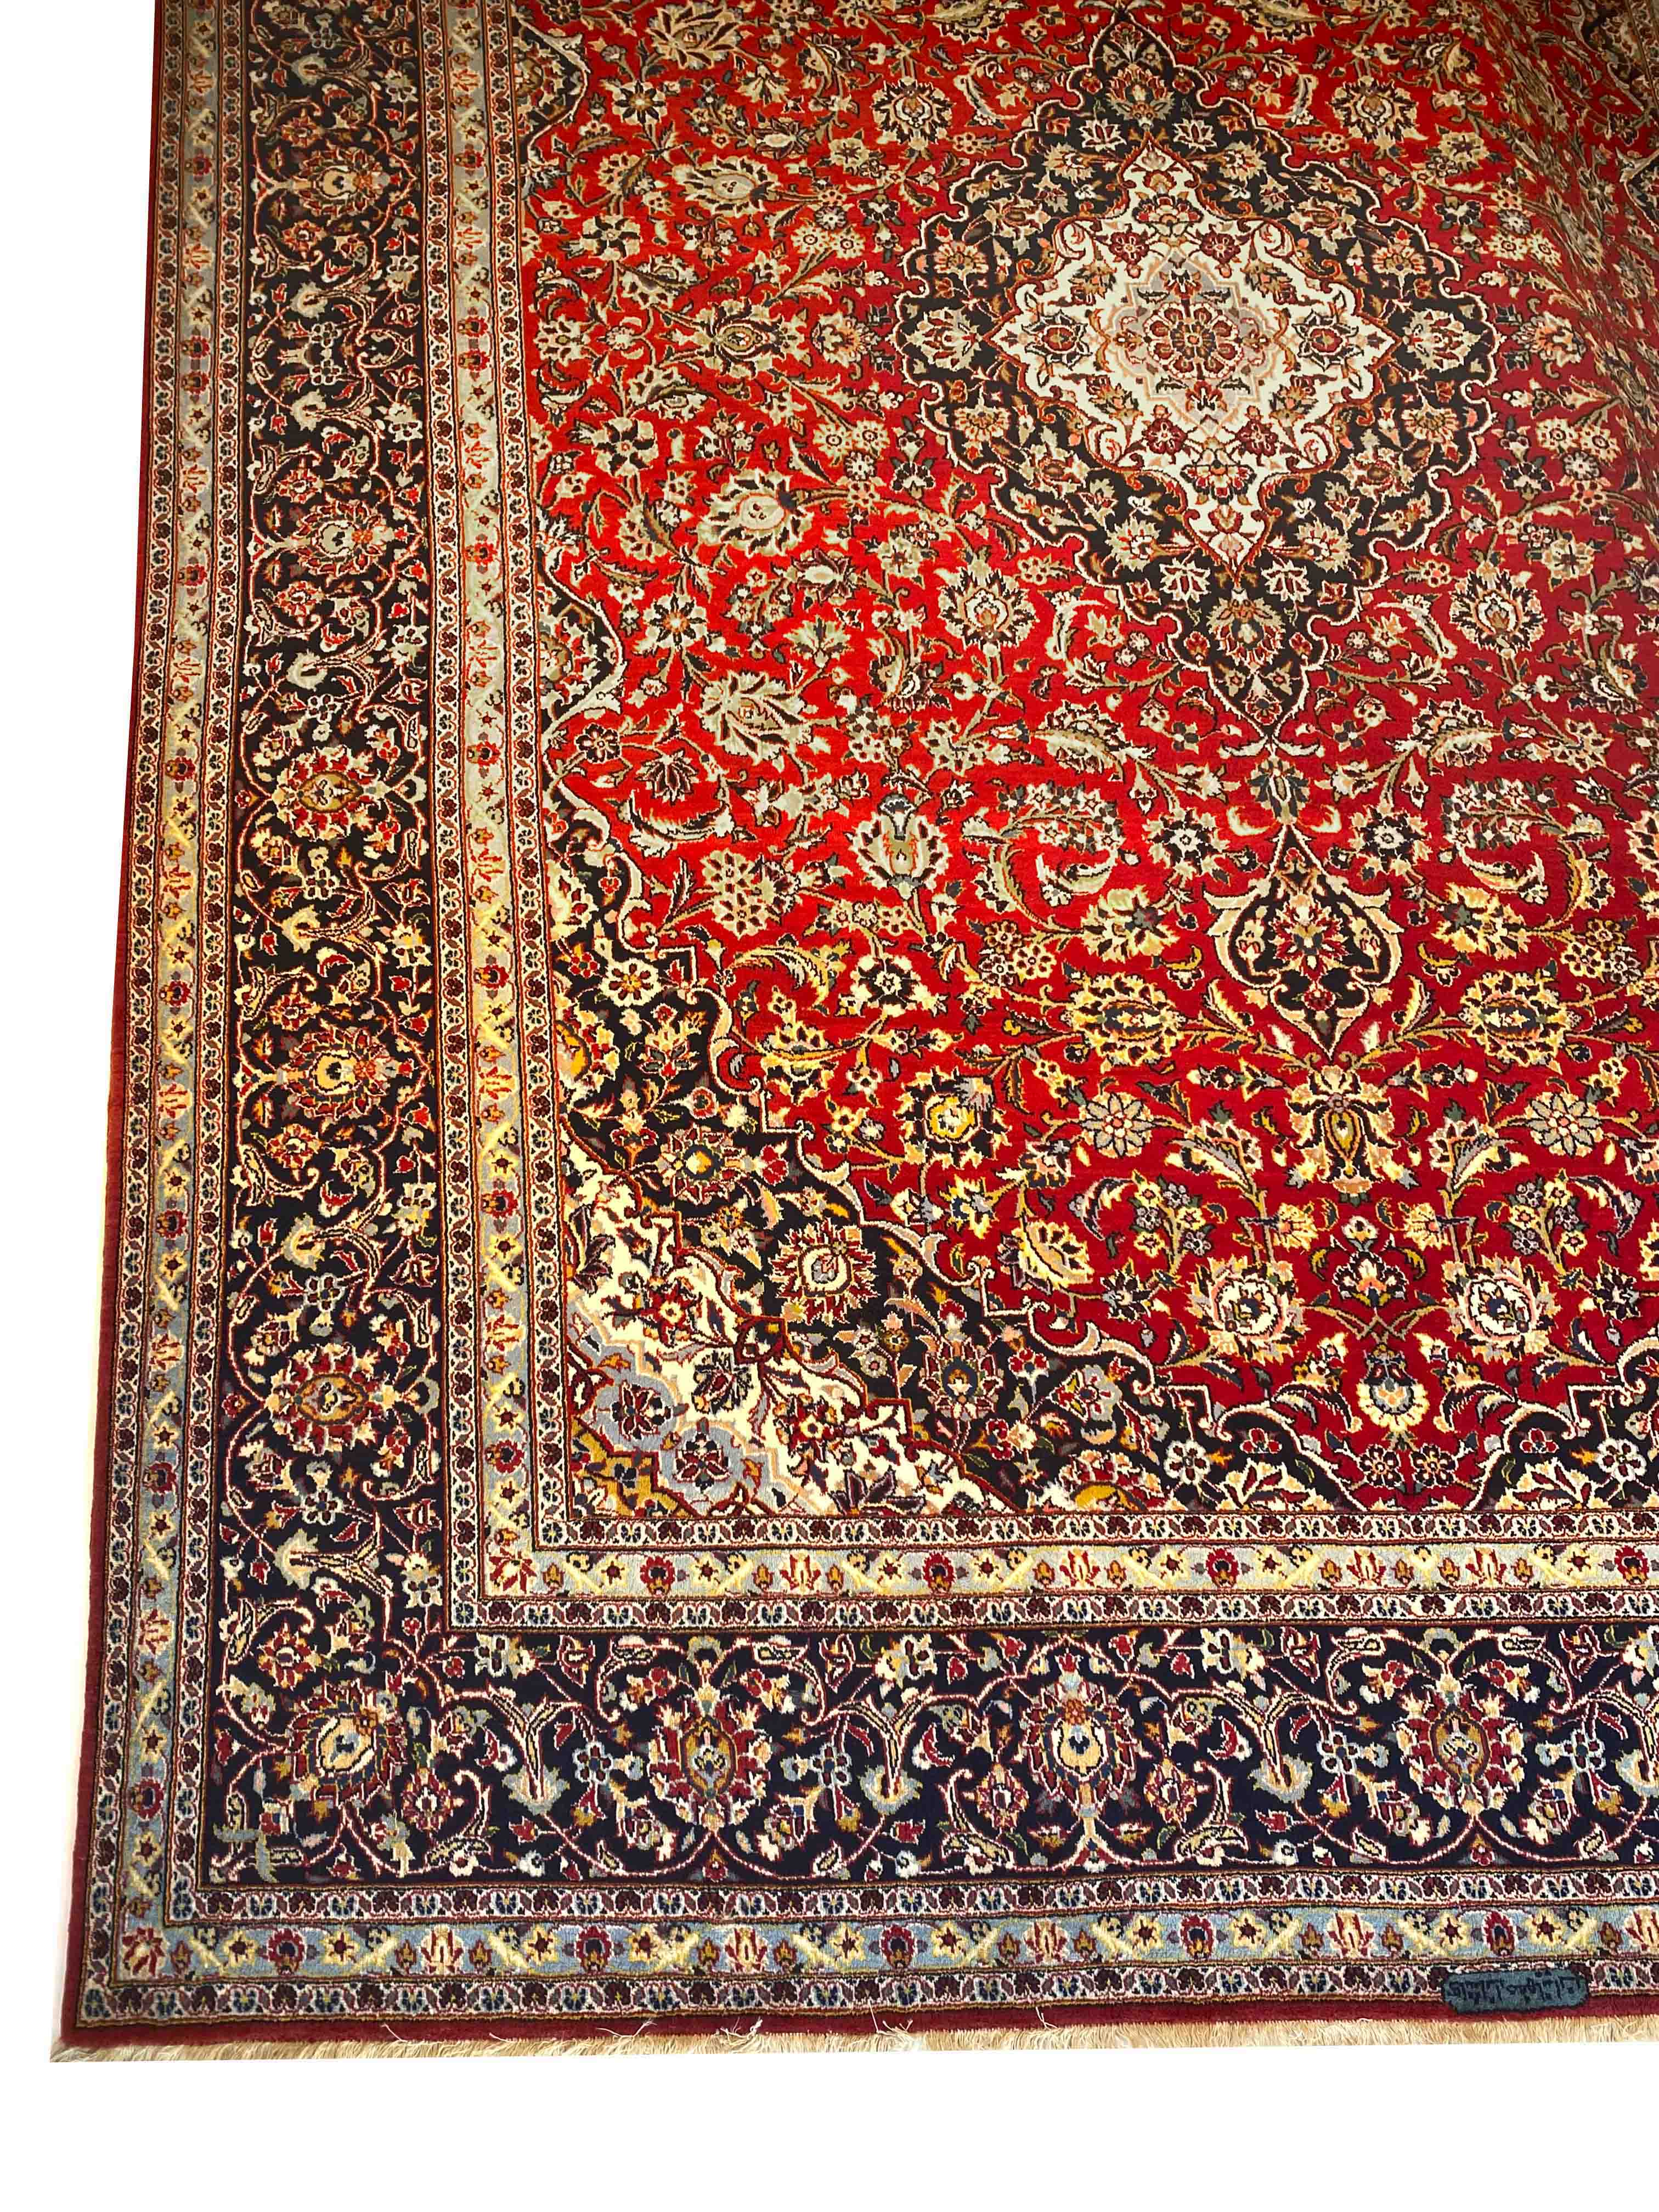 Carpet, Keshan, good condition, signed, 400 x 300 cm - The carpet can only be viewed and collected